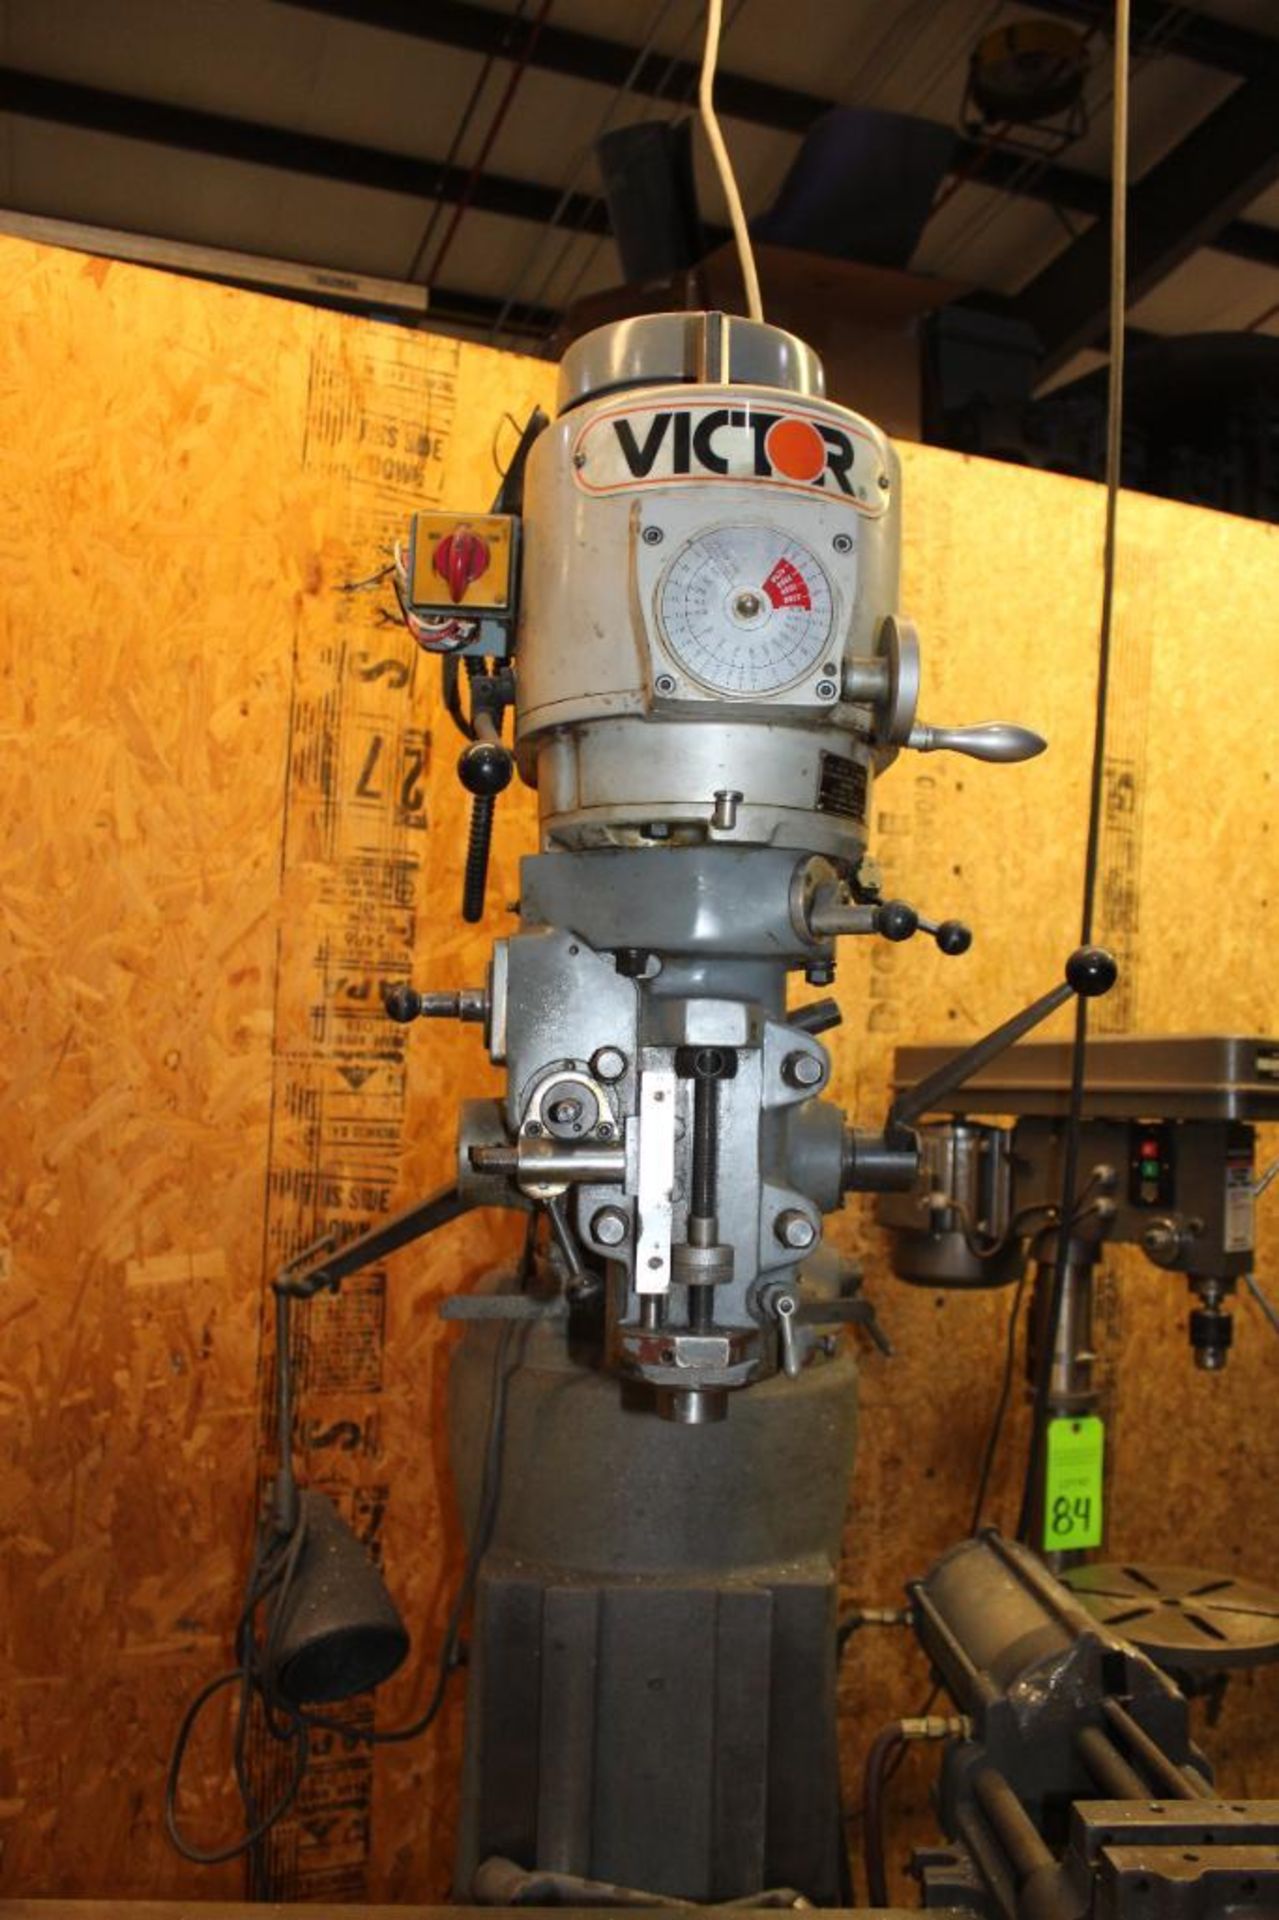 Victor Knee Mill Model CD2VS W/ AcuRite Millmate and 12" Rotary Table Bridgeport News - Image 6 of 10